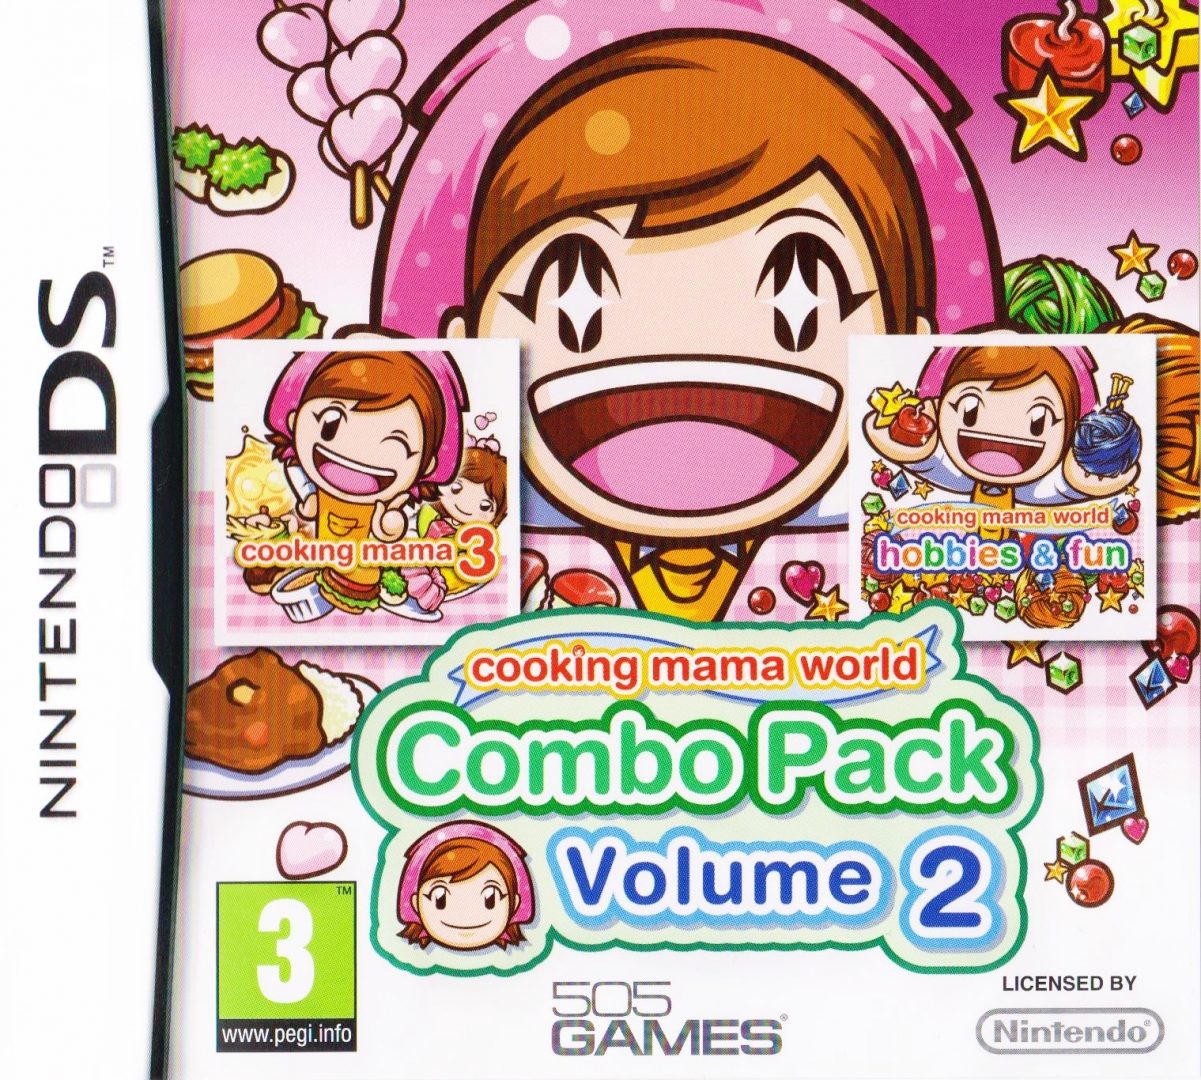 The coverart image of Cooking Mama World: Combo Pack Volume 2 